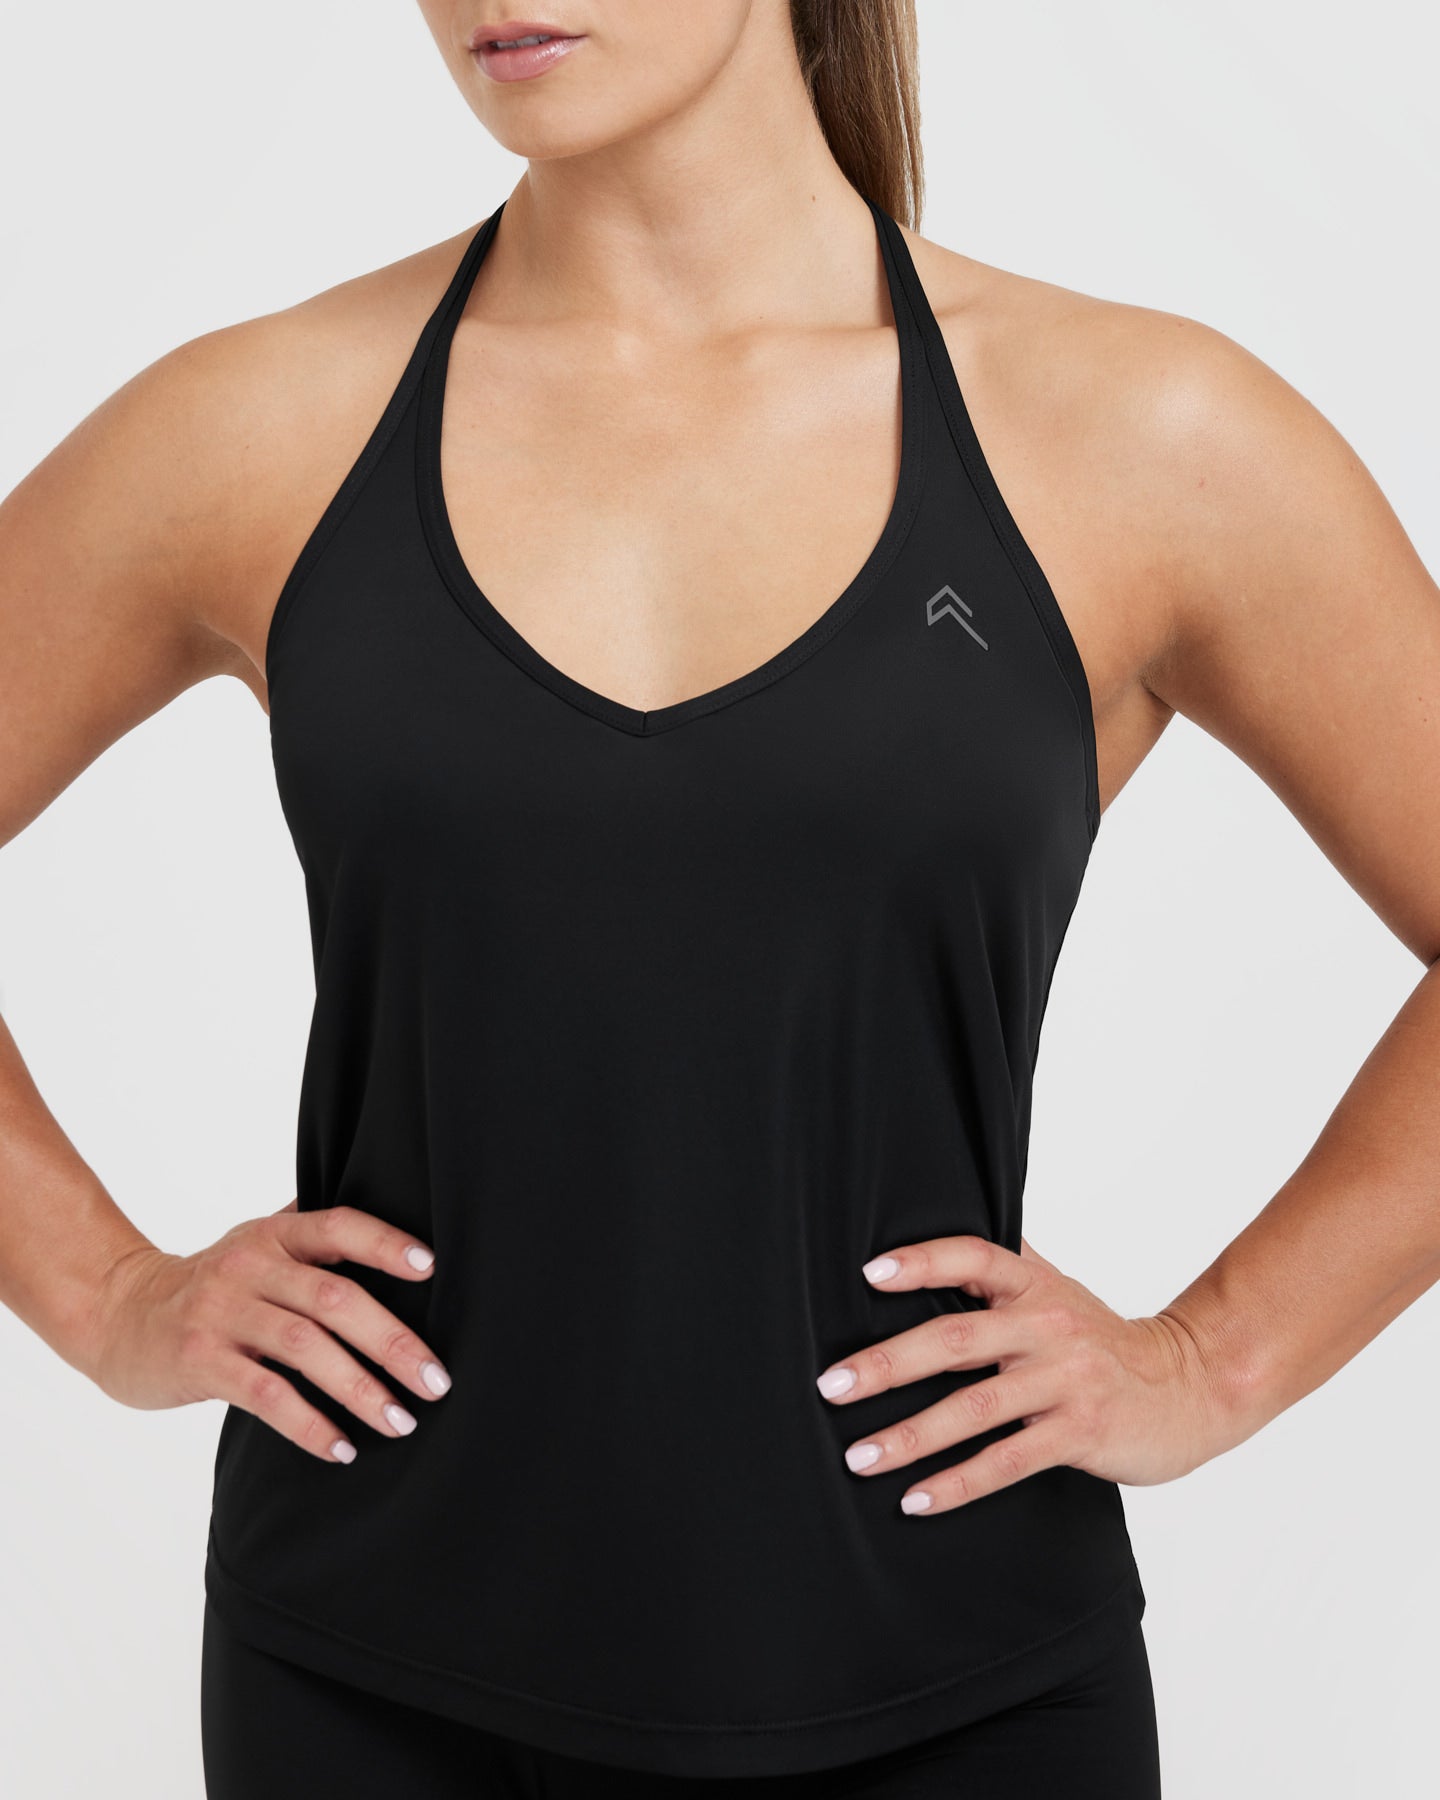 Womens Loose Fit Vest Top - GRASPP Fitness